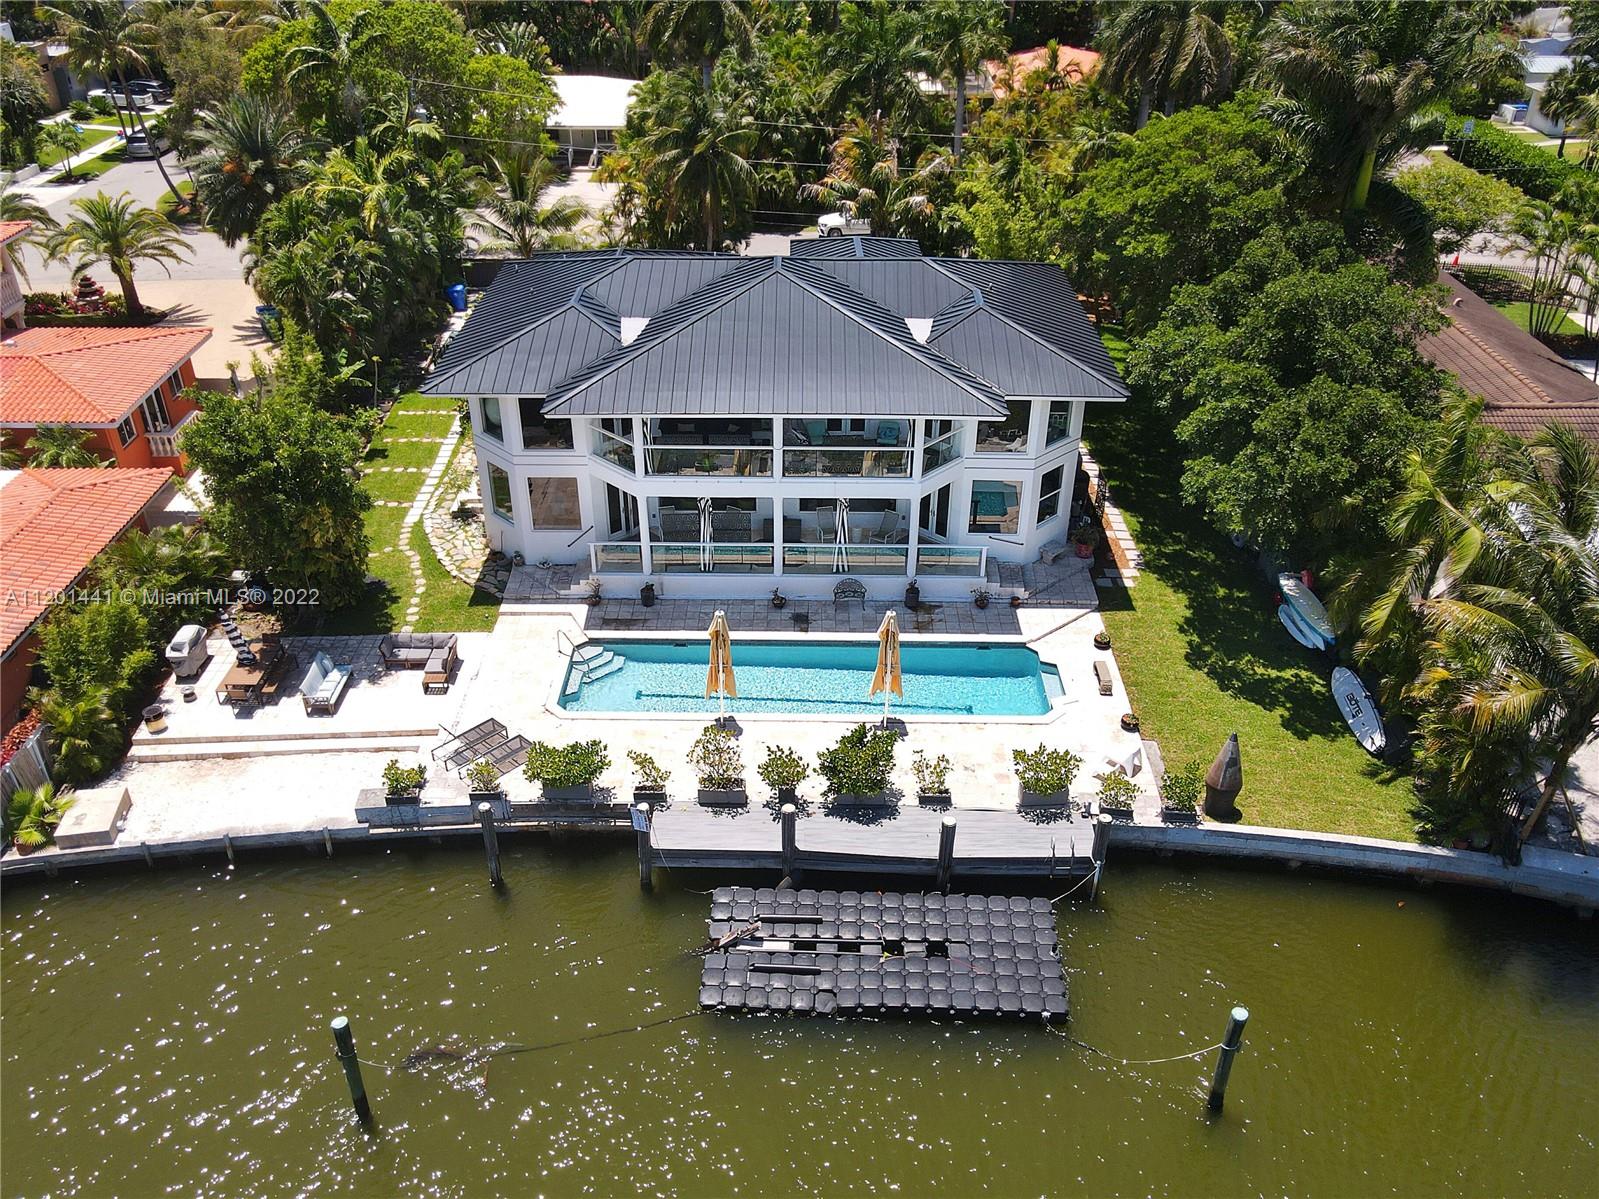 Attention boaters. This grand 7 bedroom, 5 bathroom, modern masterpiece sits on a 17,717 sf lot with 120' on the deep water, just 500 feet in from the wide bay with wide water views. Enter the front gates to a huge car park, 2 car garage, and an impressive 2 story home with a new metal roof, impact windows and doors, new a/c, white porcelain tile throughout, volume ceilings, large Italian kitchen with DACOR appliances, large stacked back porches to enjoy the water views, waterfront pool and dock. Home has Volume ceilings, second floor family room, and  French doors that open to a huge master suite with glass walls bringing the expansive views to you. Bring your fussiest buyers.